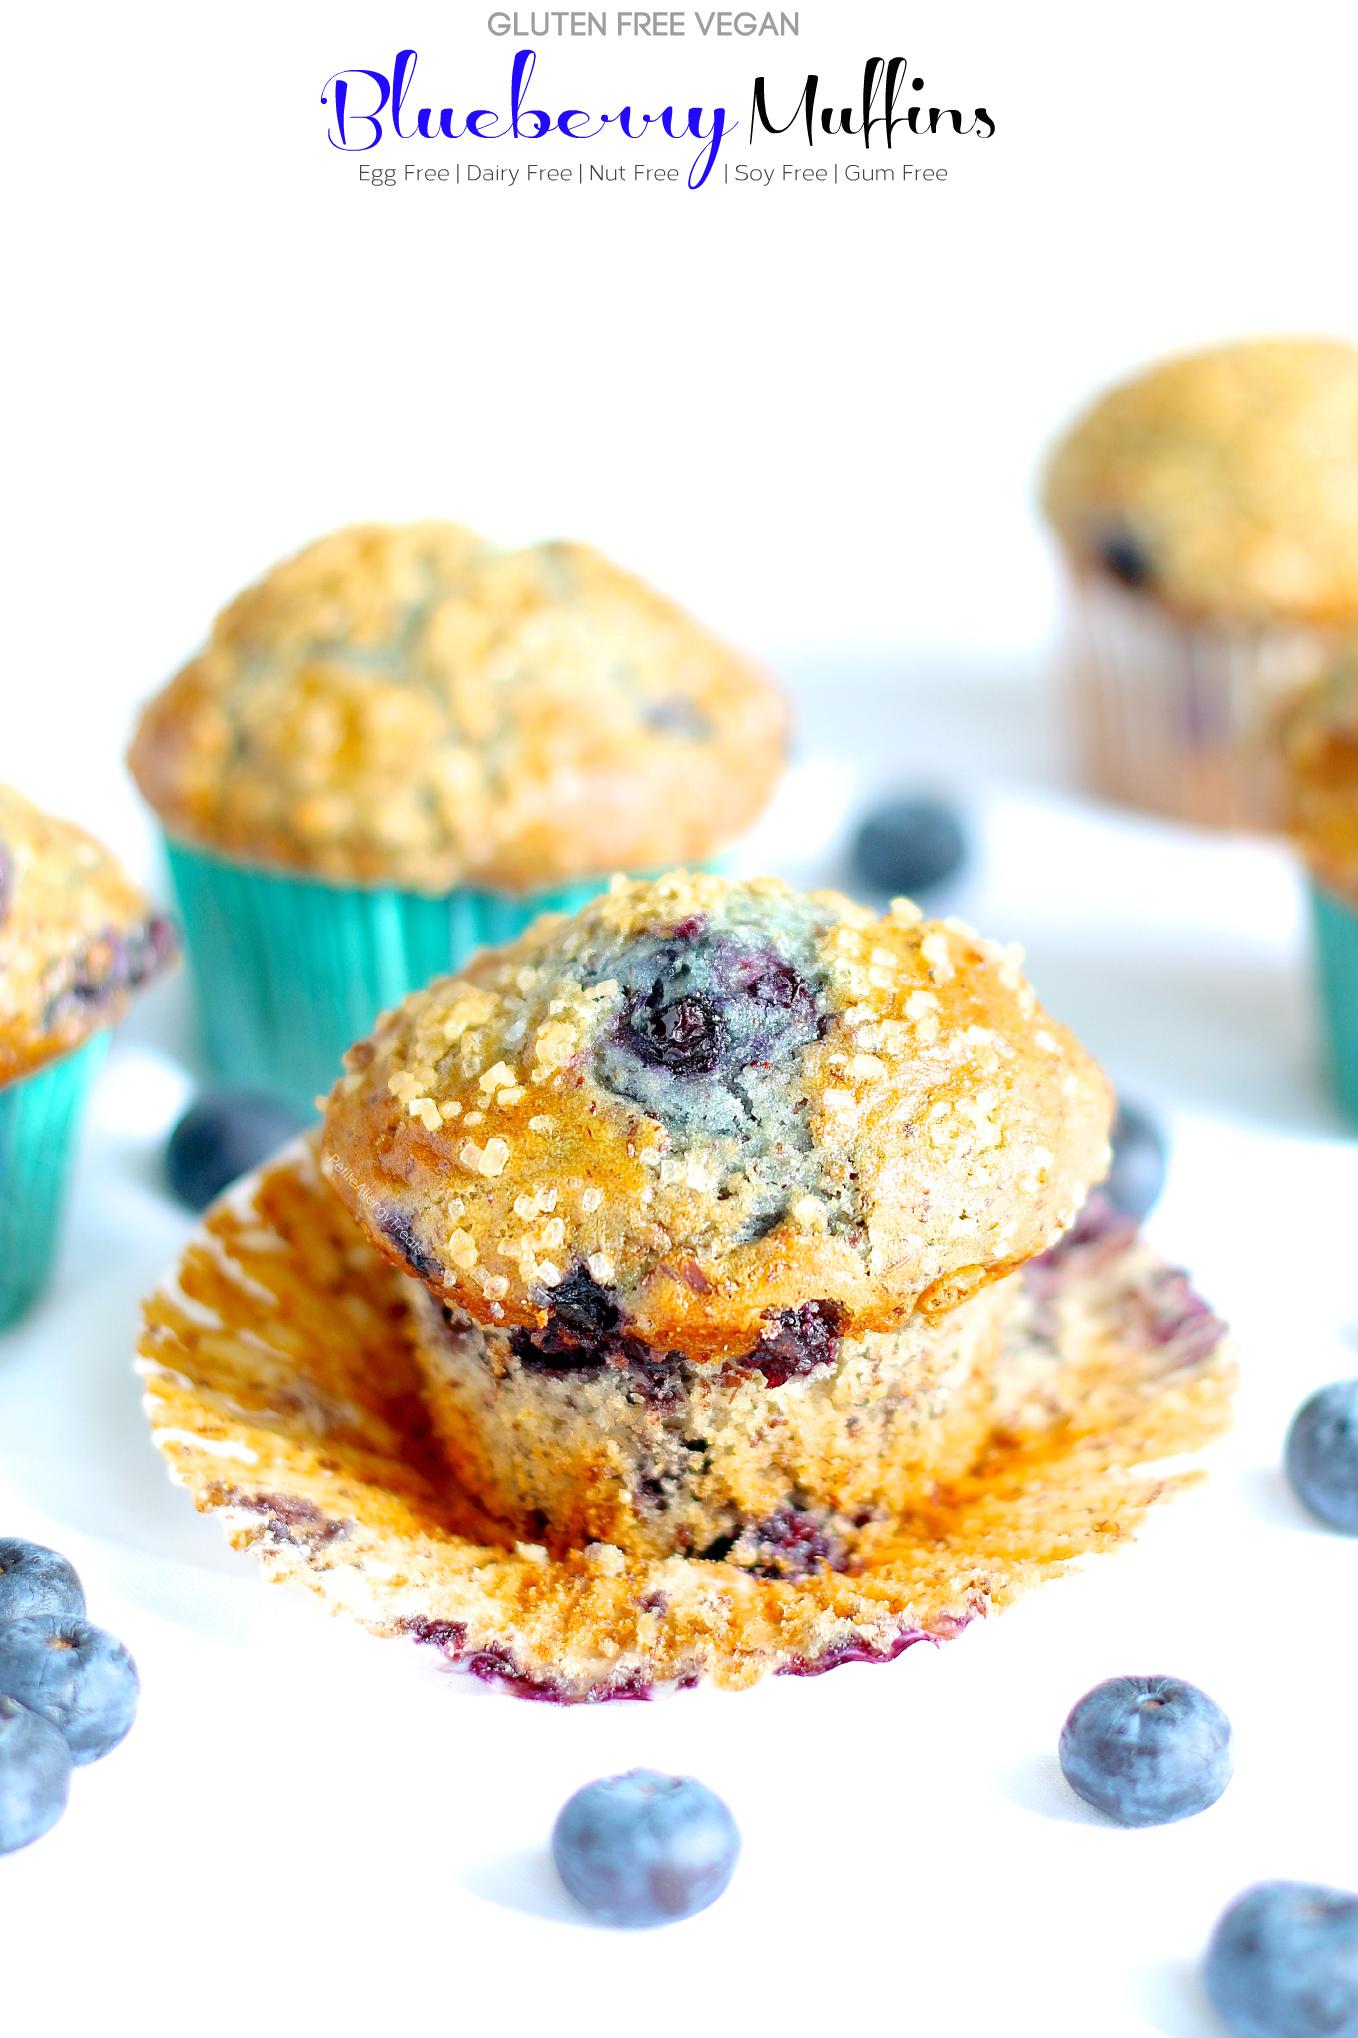  With the added nutrients of flaxseed, these muffins are a great way to start